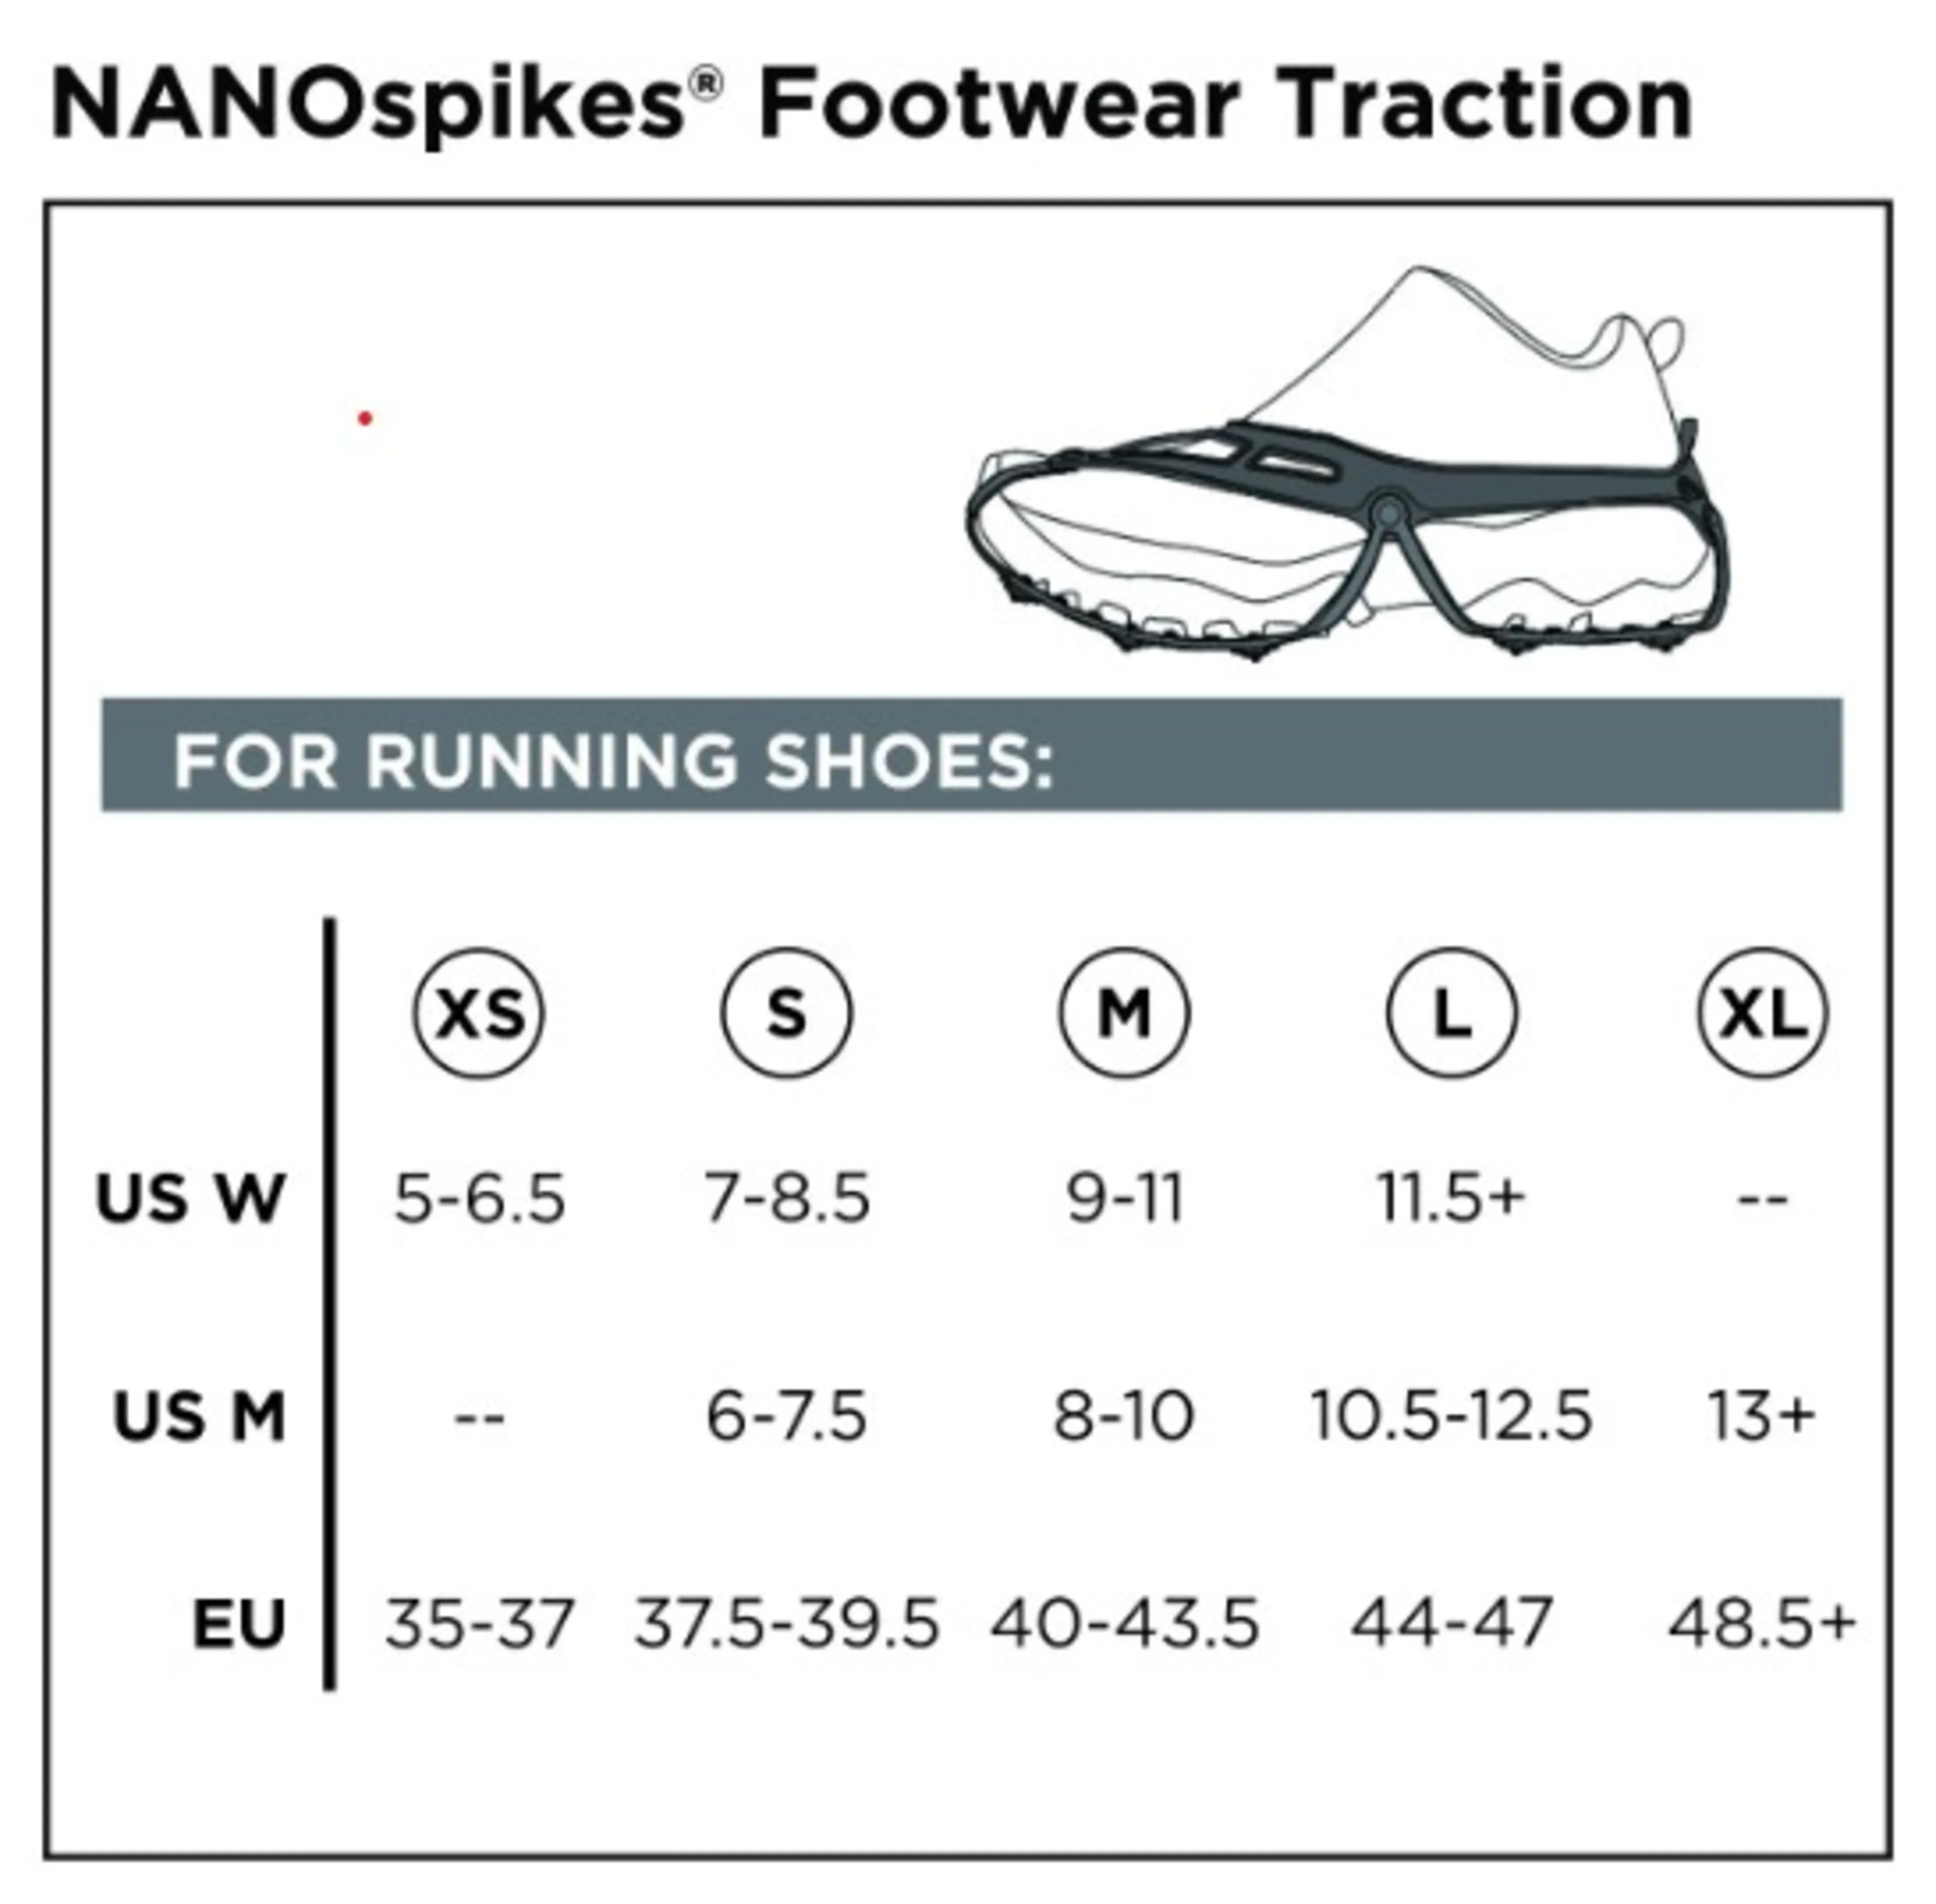 NANOspikes Footwear Traction v2, M